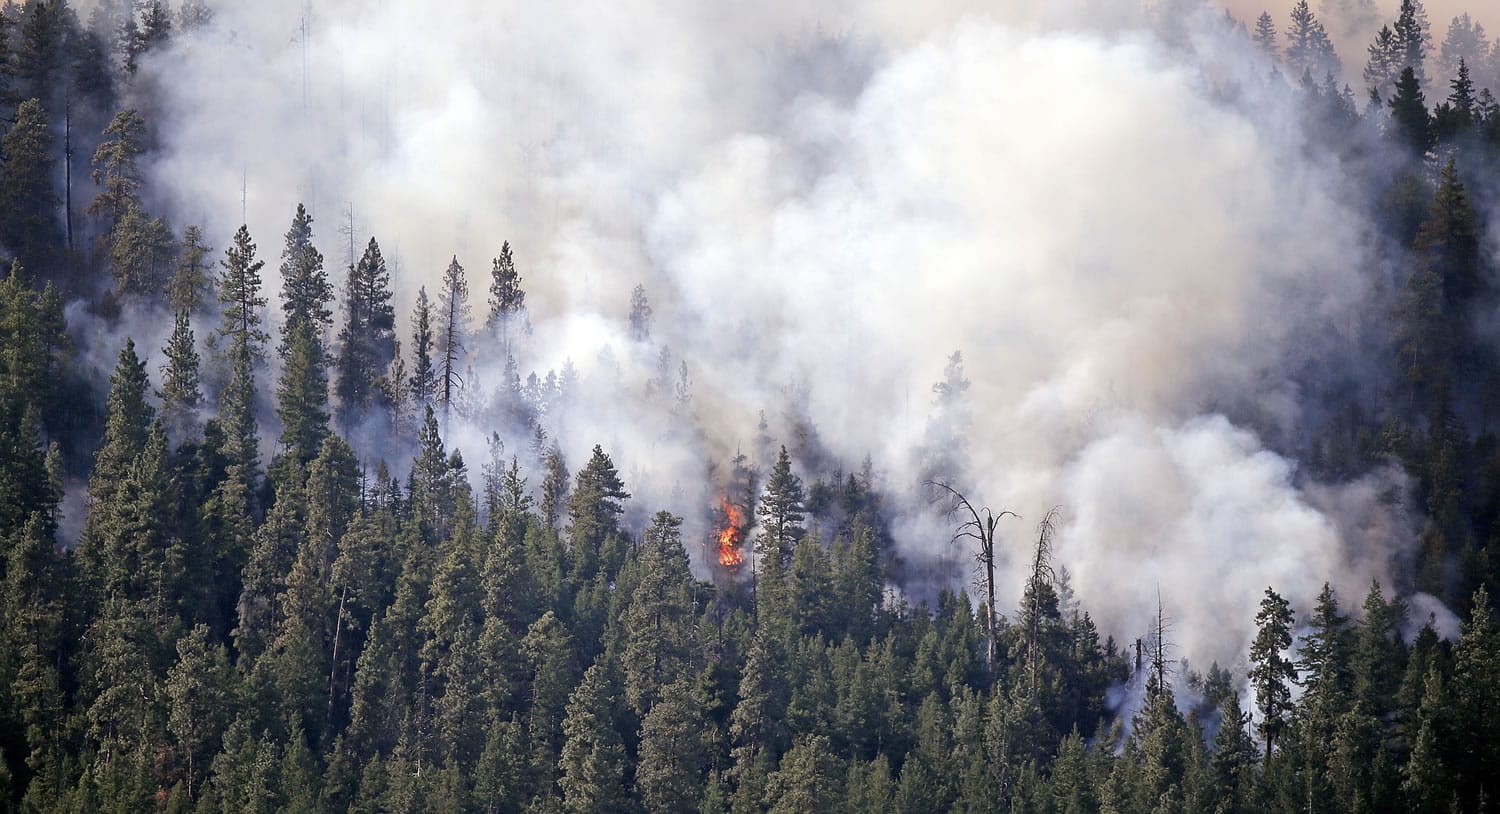 Smoke rises from a thickly timbered hillside as a tree goes up in flames in the hills above Twisp on Friday.